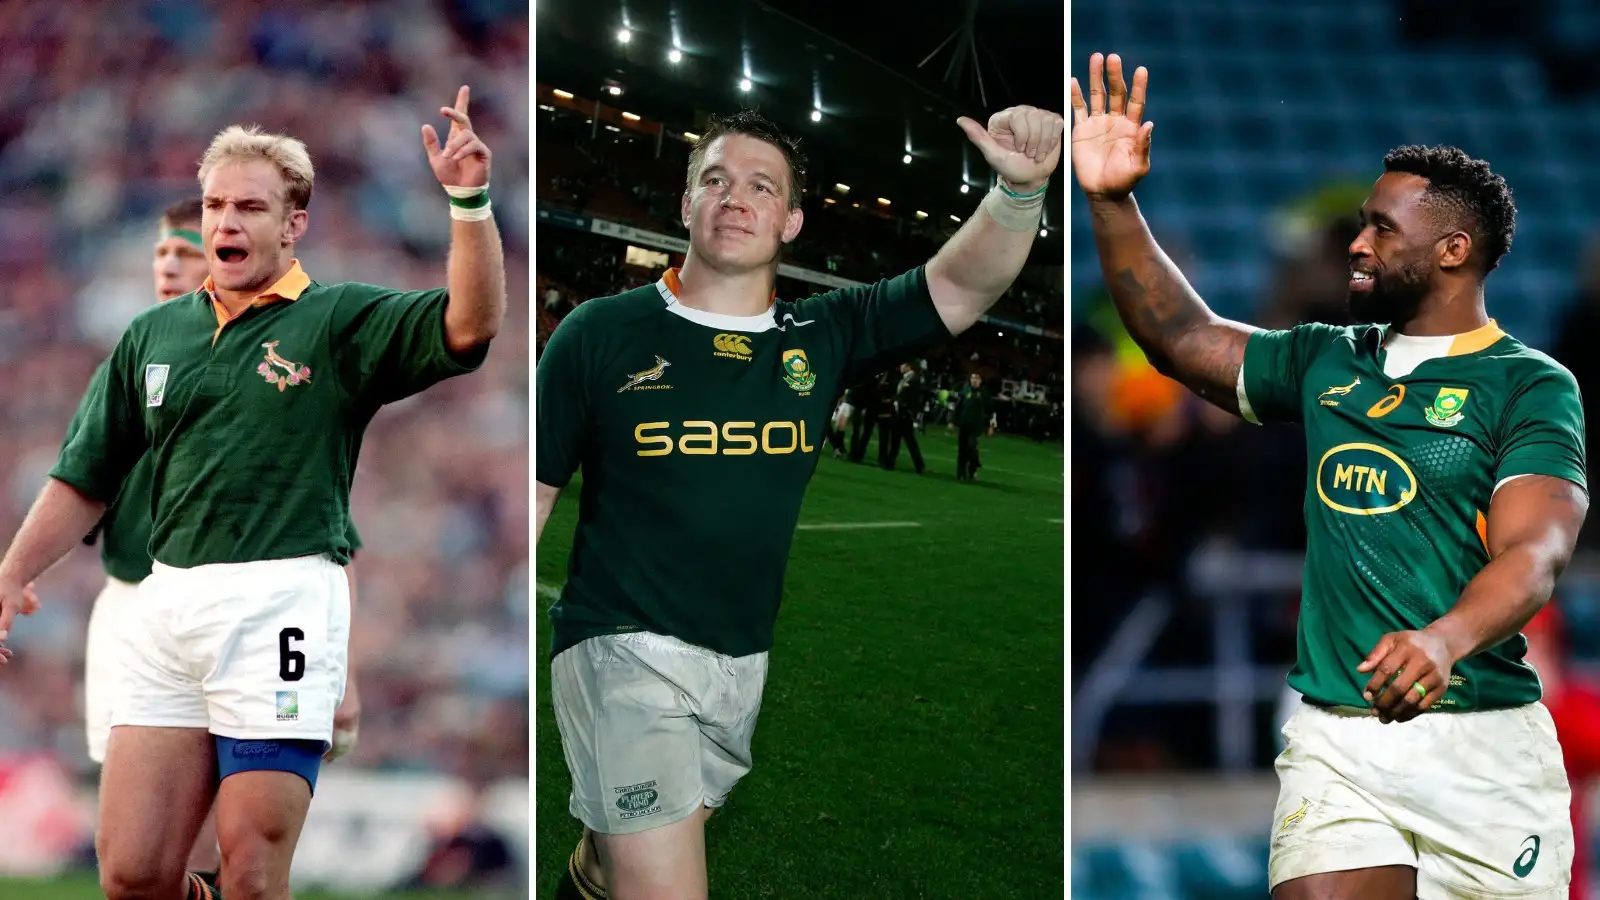 The 30 greatest Springboks of the past 40 years have been selected, with 27 Rugby World Cup winners making the cut.  South African Sunday newspaper the Rapport counted down the greatest players to have donned the Green and Gold over the last 40 years, with an esteemed panel making the selections.